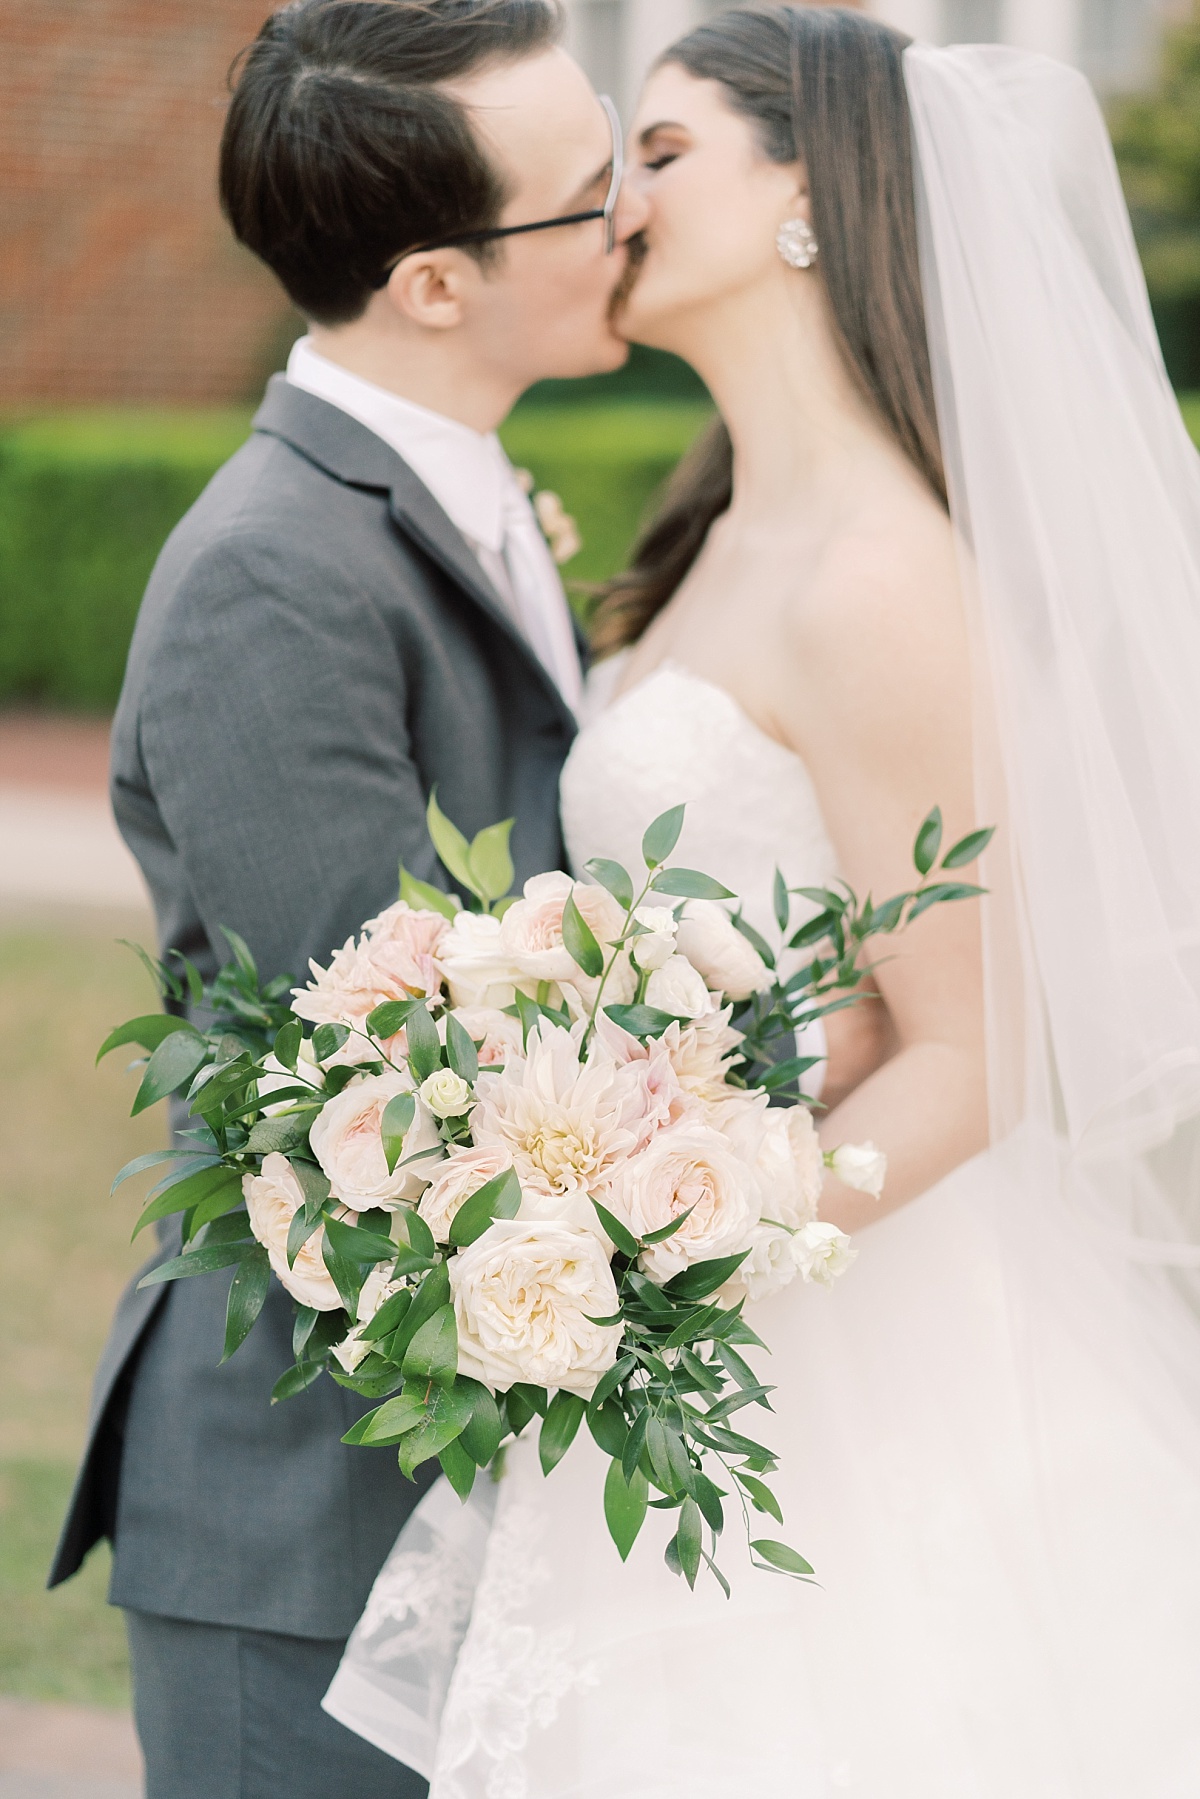 The camera focuses on a beautiful blush pink bouquet being held by a bride while kissing her new husband and having wedding photos taken by Paige Vaughn Photography.